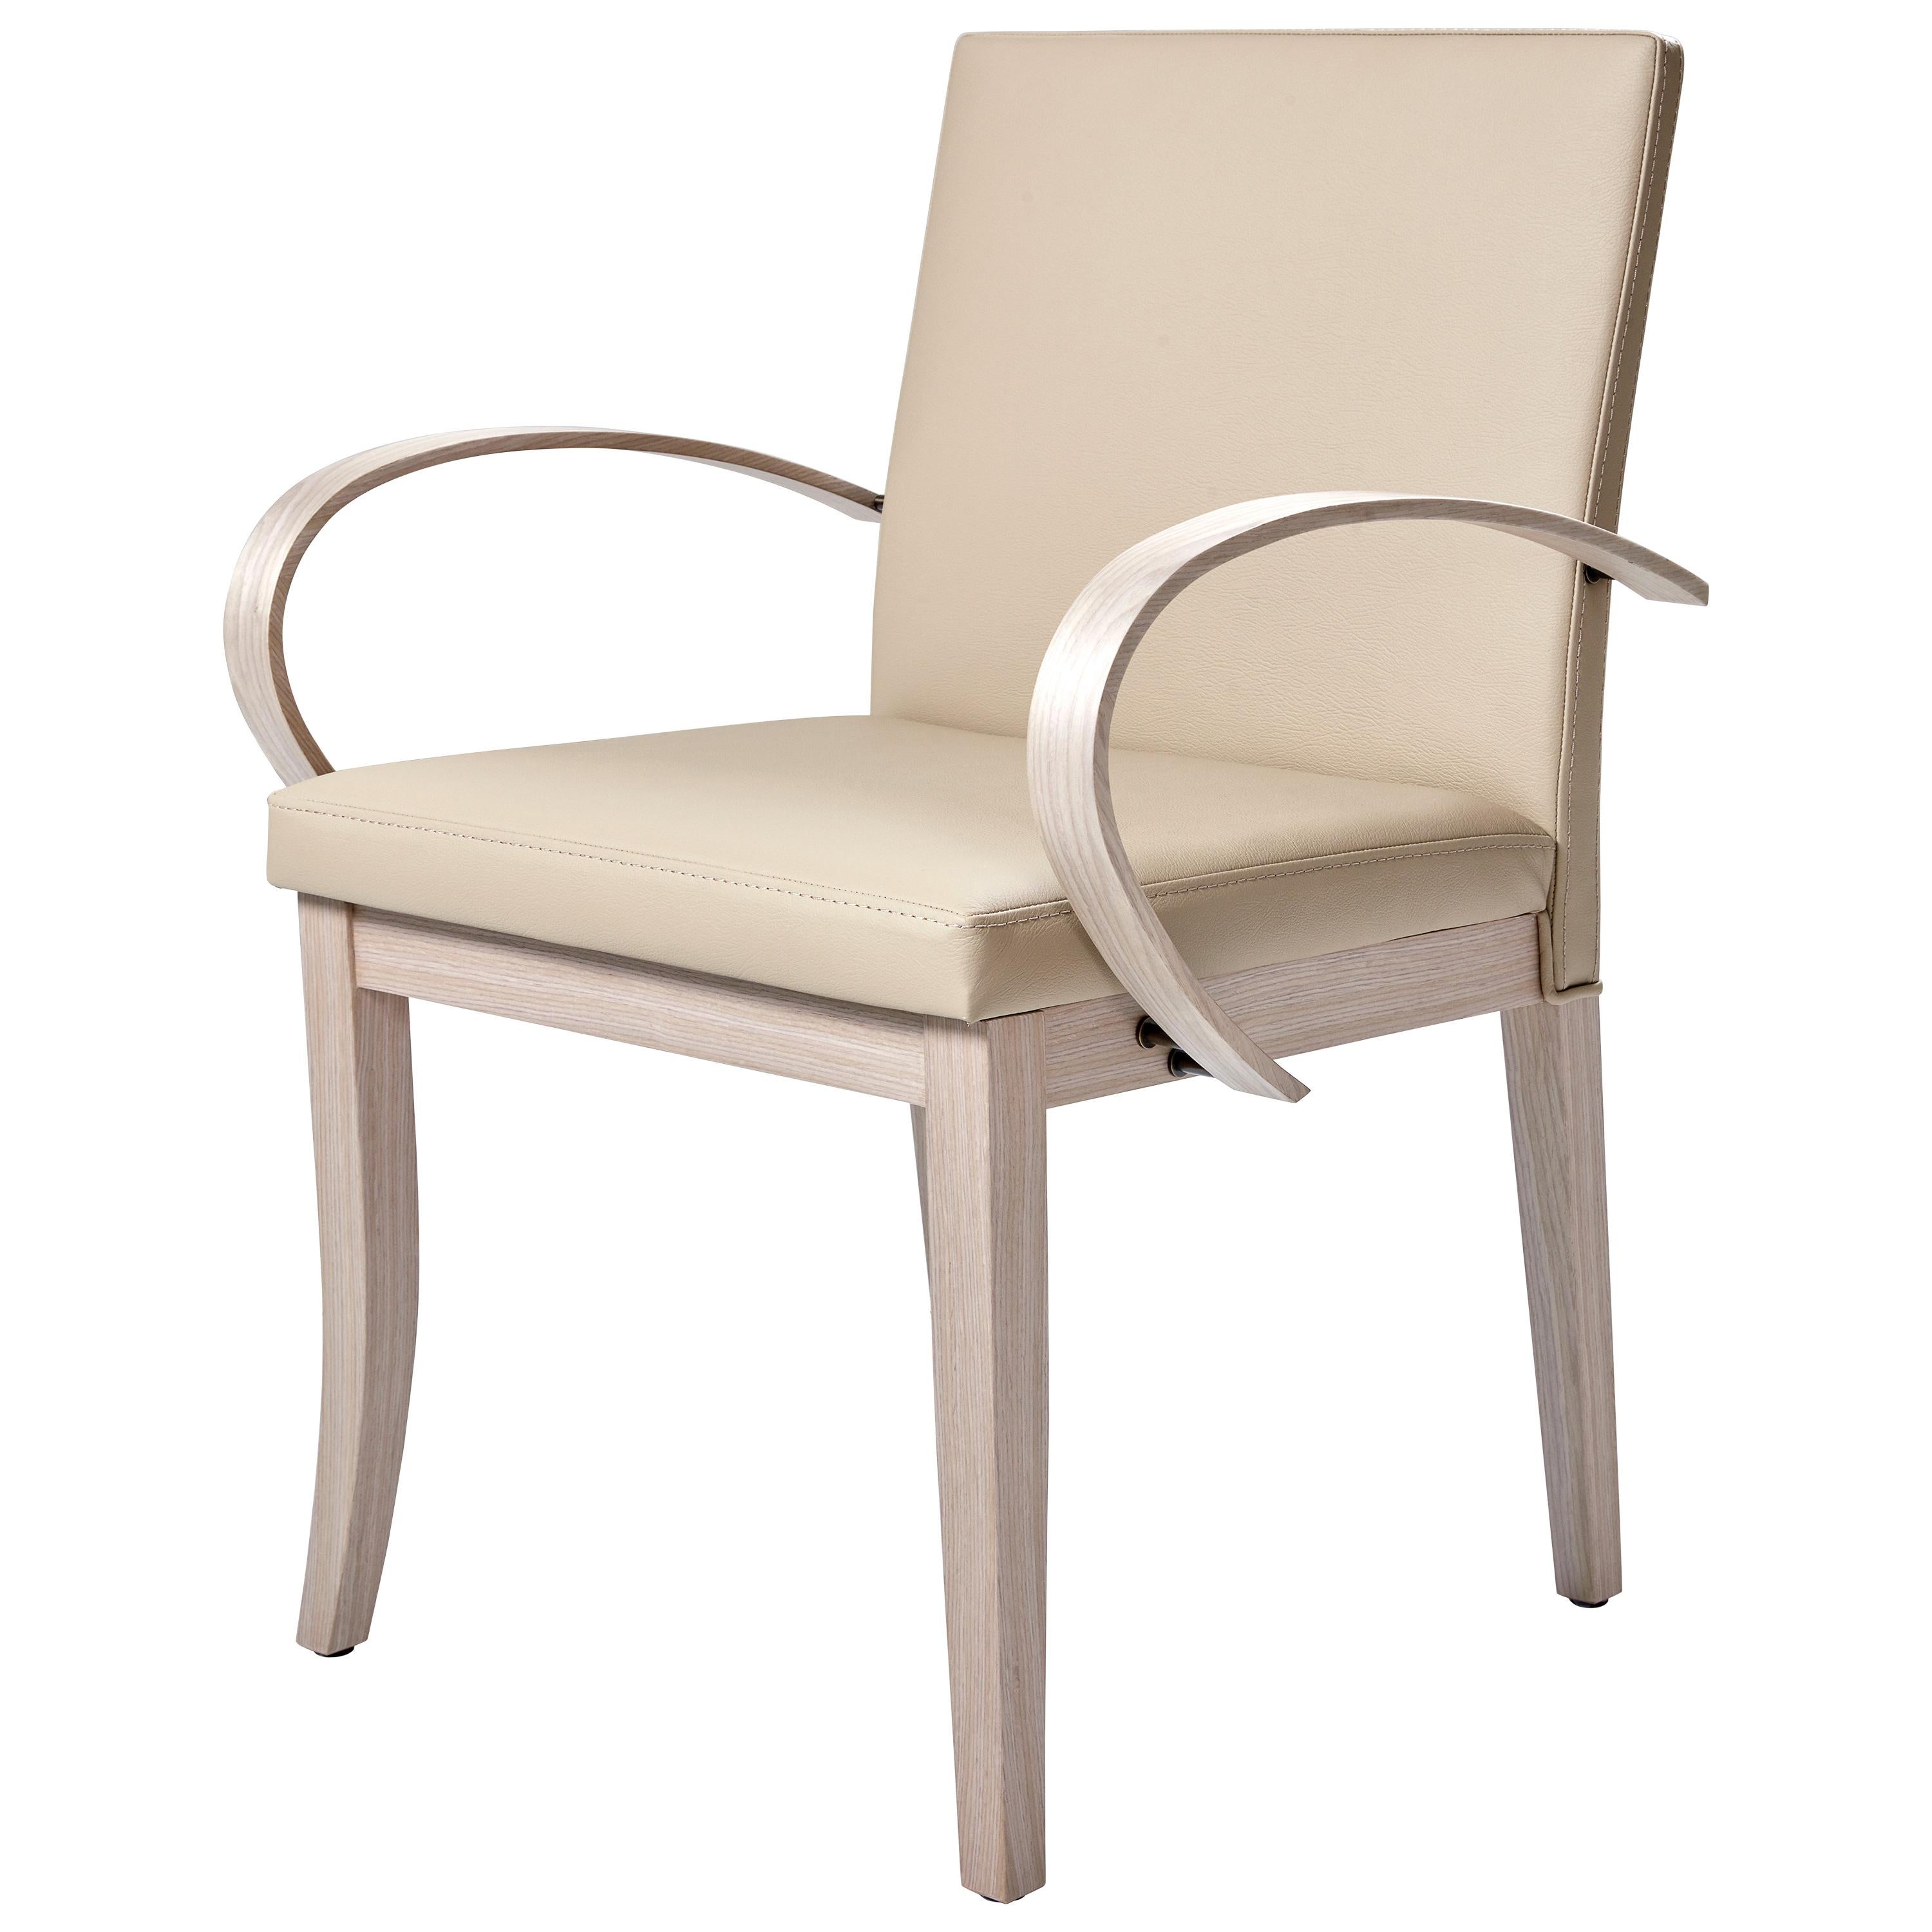 Sisli Chair, Slightly Flared Leg and Slim Back Pair with an Exaggerated Curved For Sale